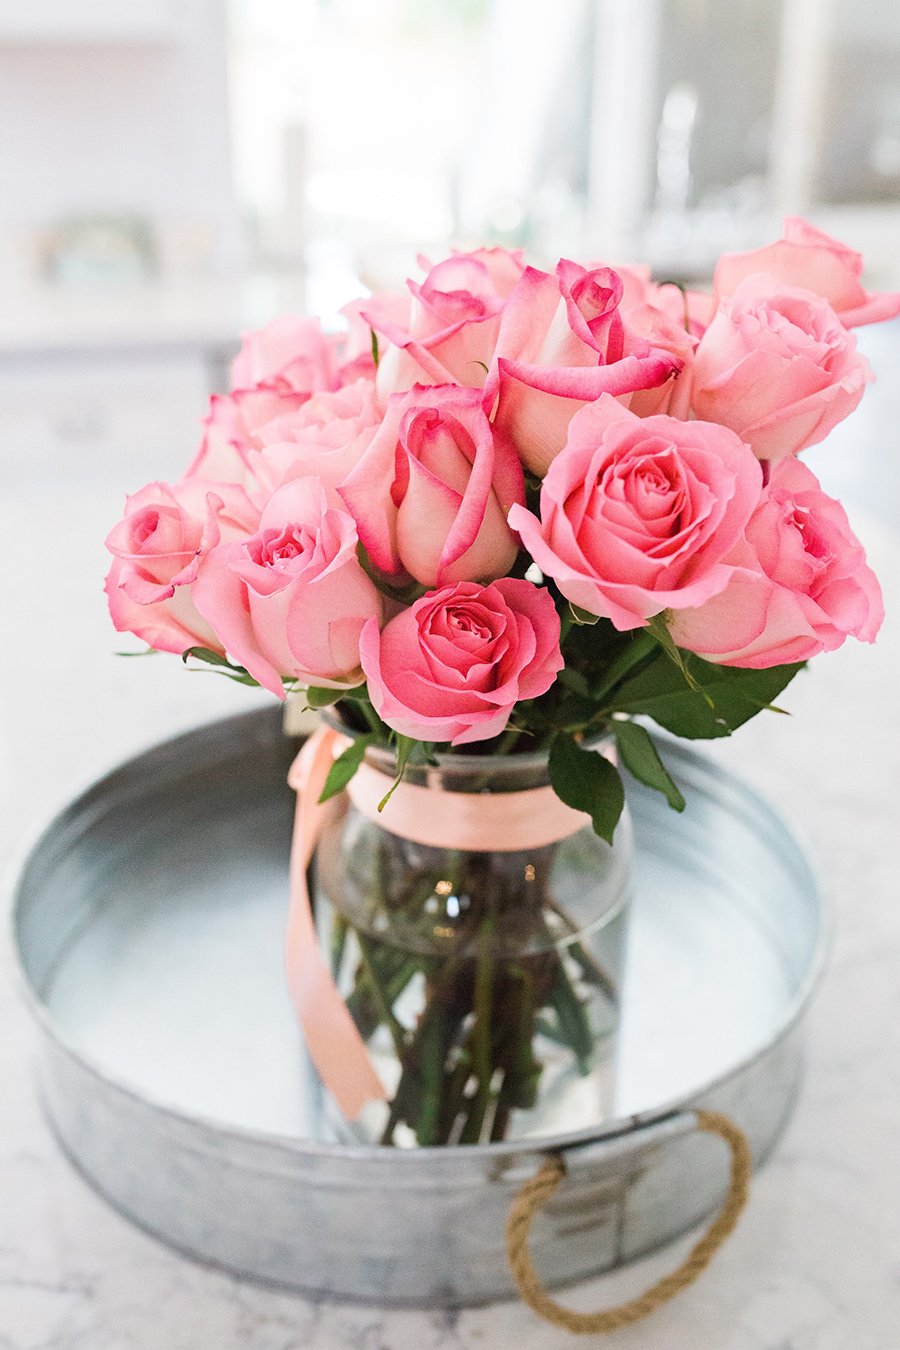 Easter Decorating Ideas bright flowers pink roses galvanized tray